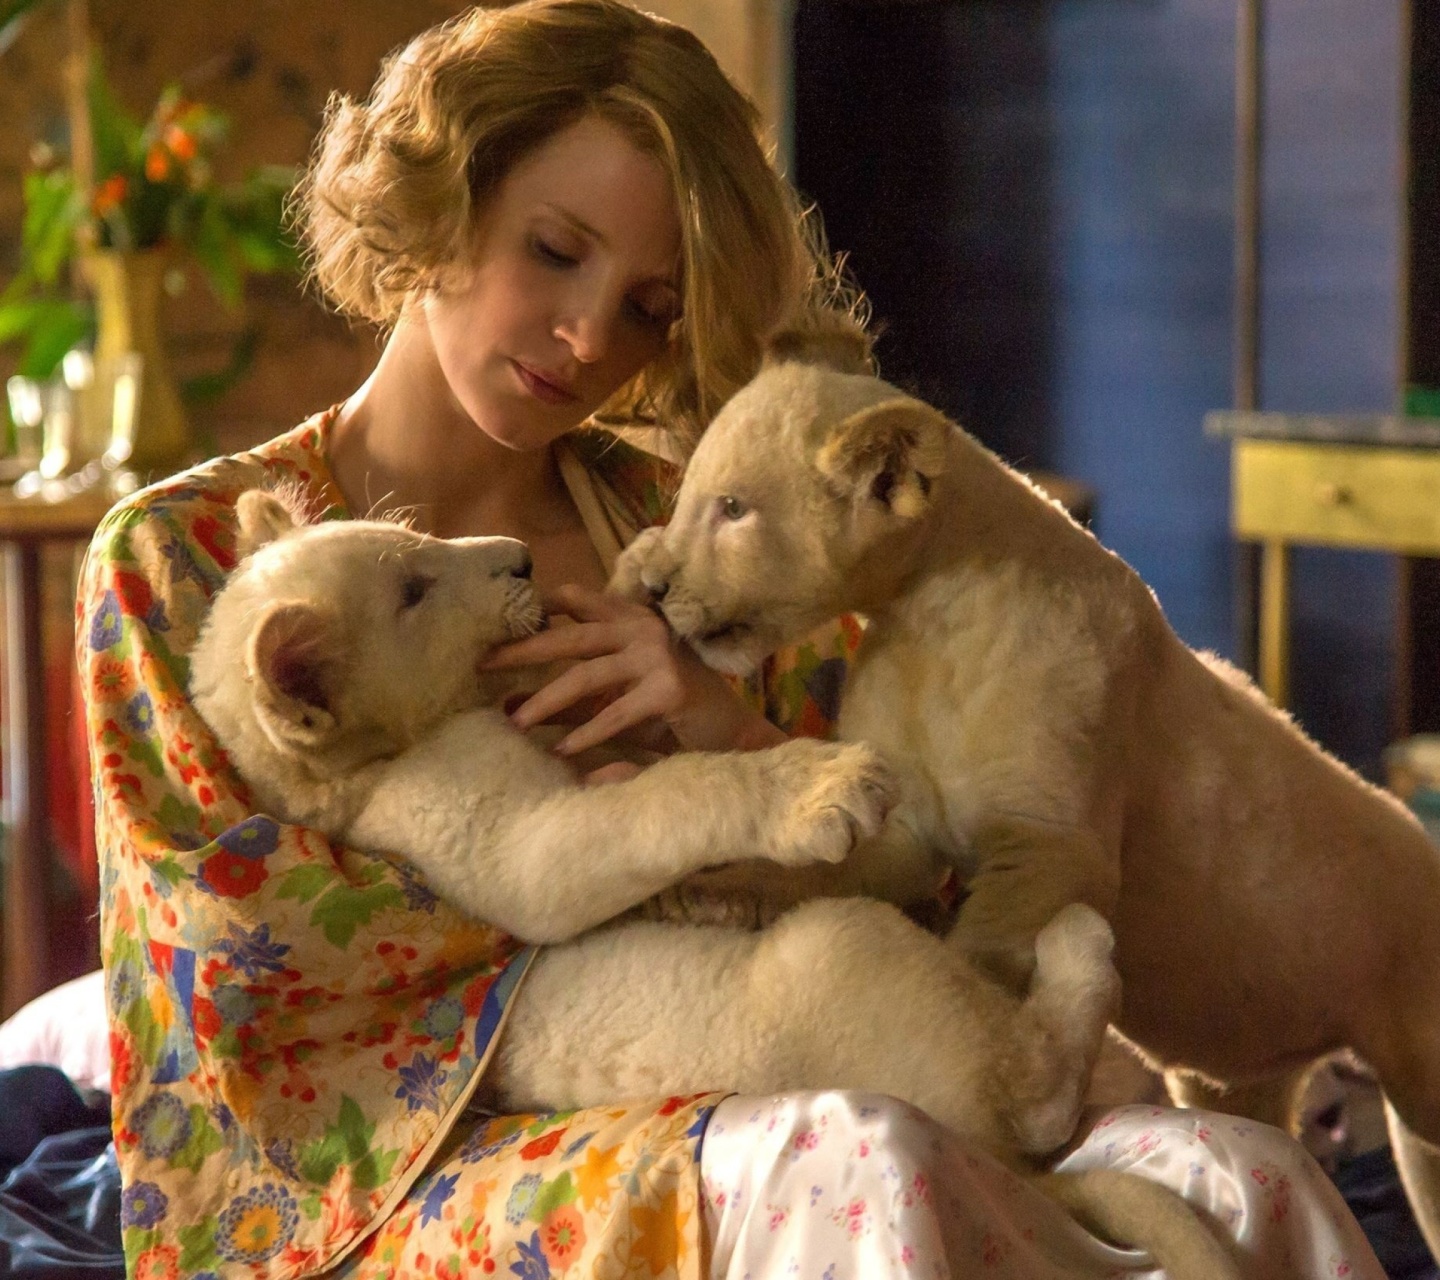 The Zookeepers Wife Film with Jessica Chastain screenshot #1 1440x1280